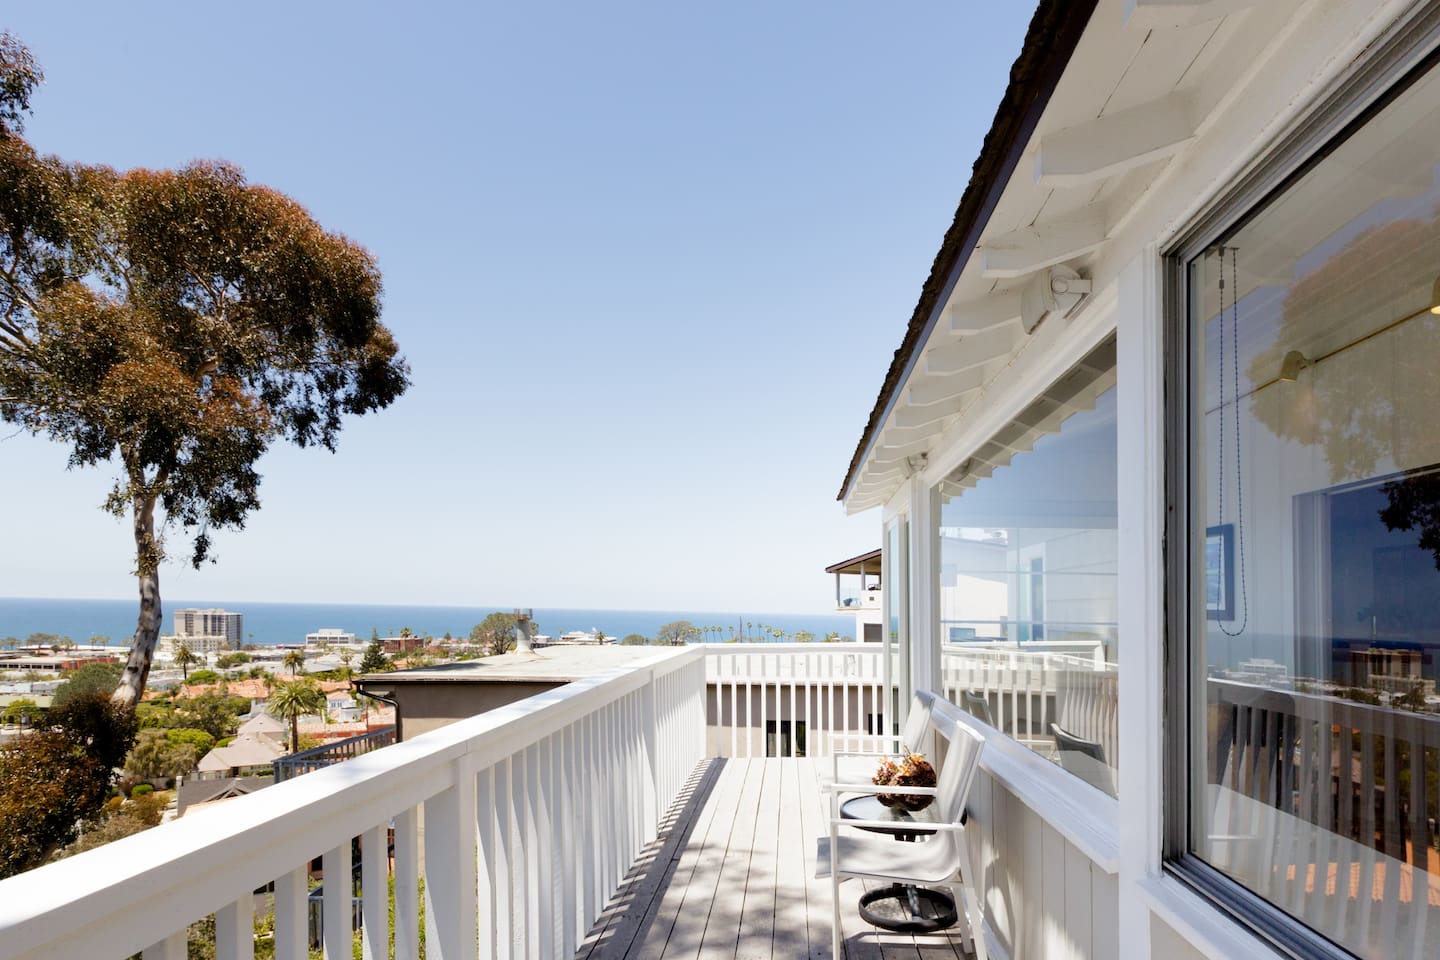 View the Ocean from Jane's La Jolla Classic Craftsman